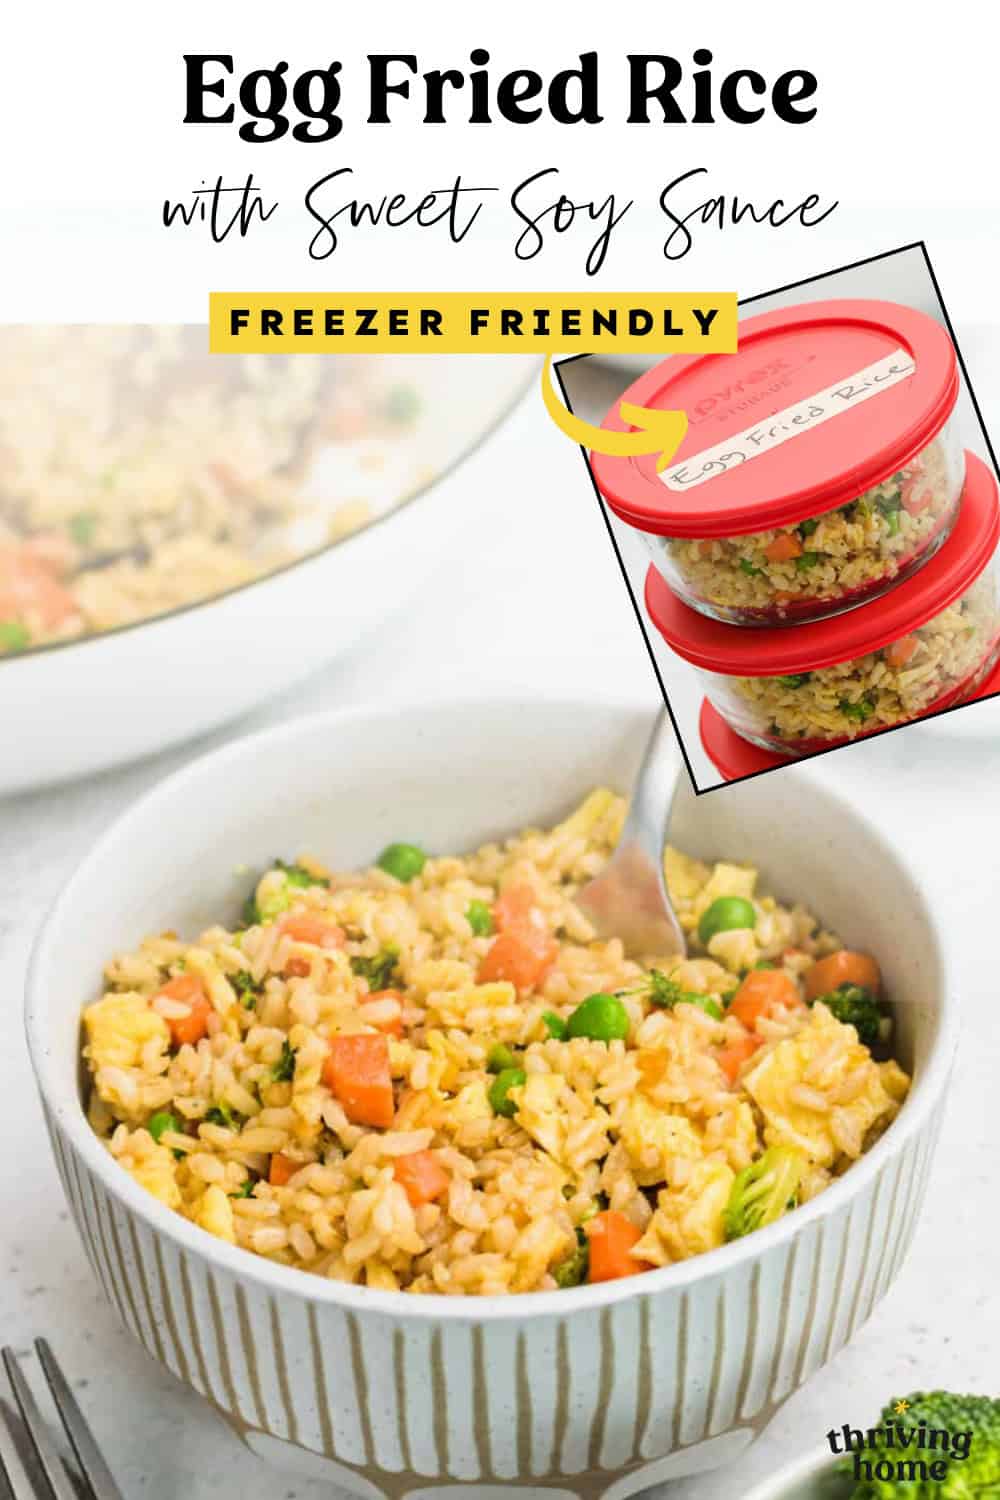 Egg fried rice in a bowl with a fork and an inset photo of Pyrex containers with rice labeled for the freezer.